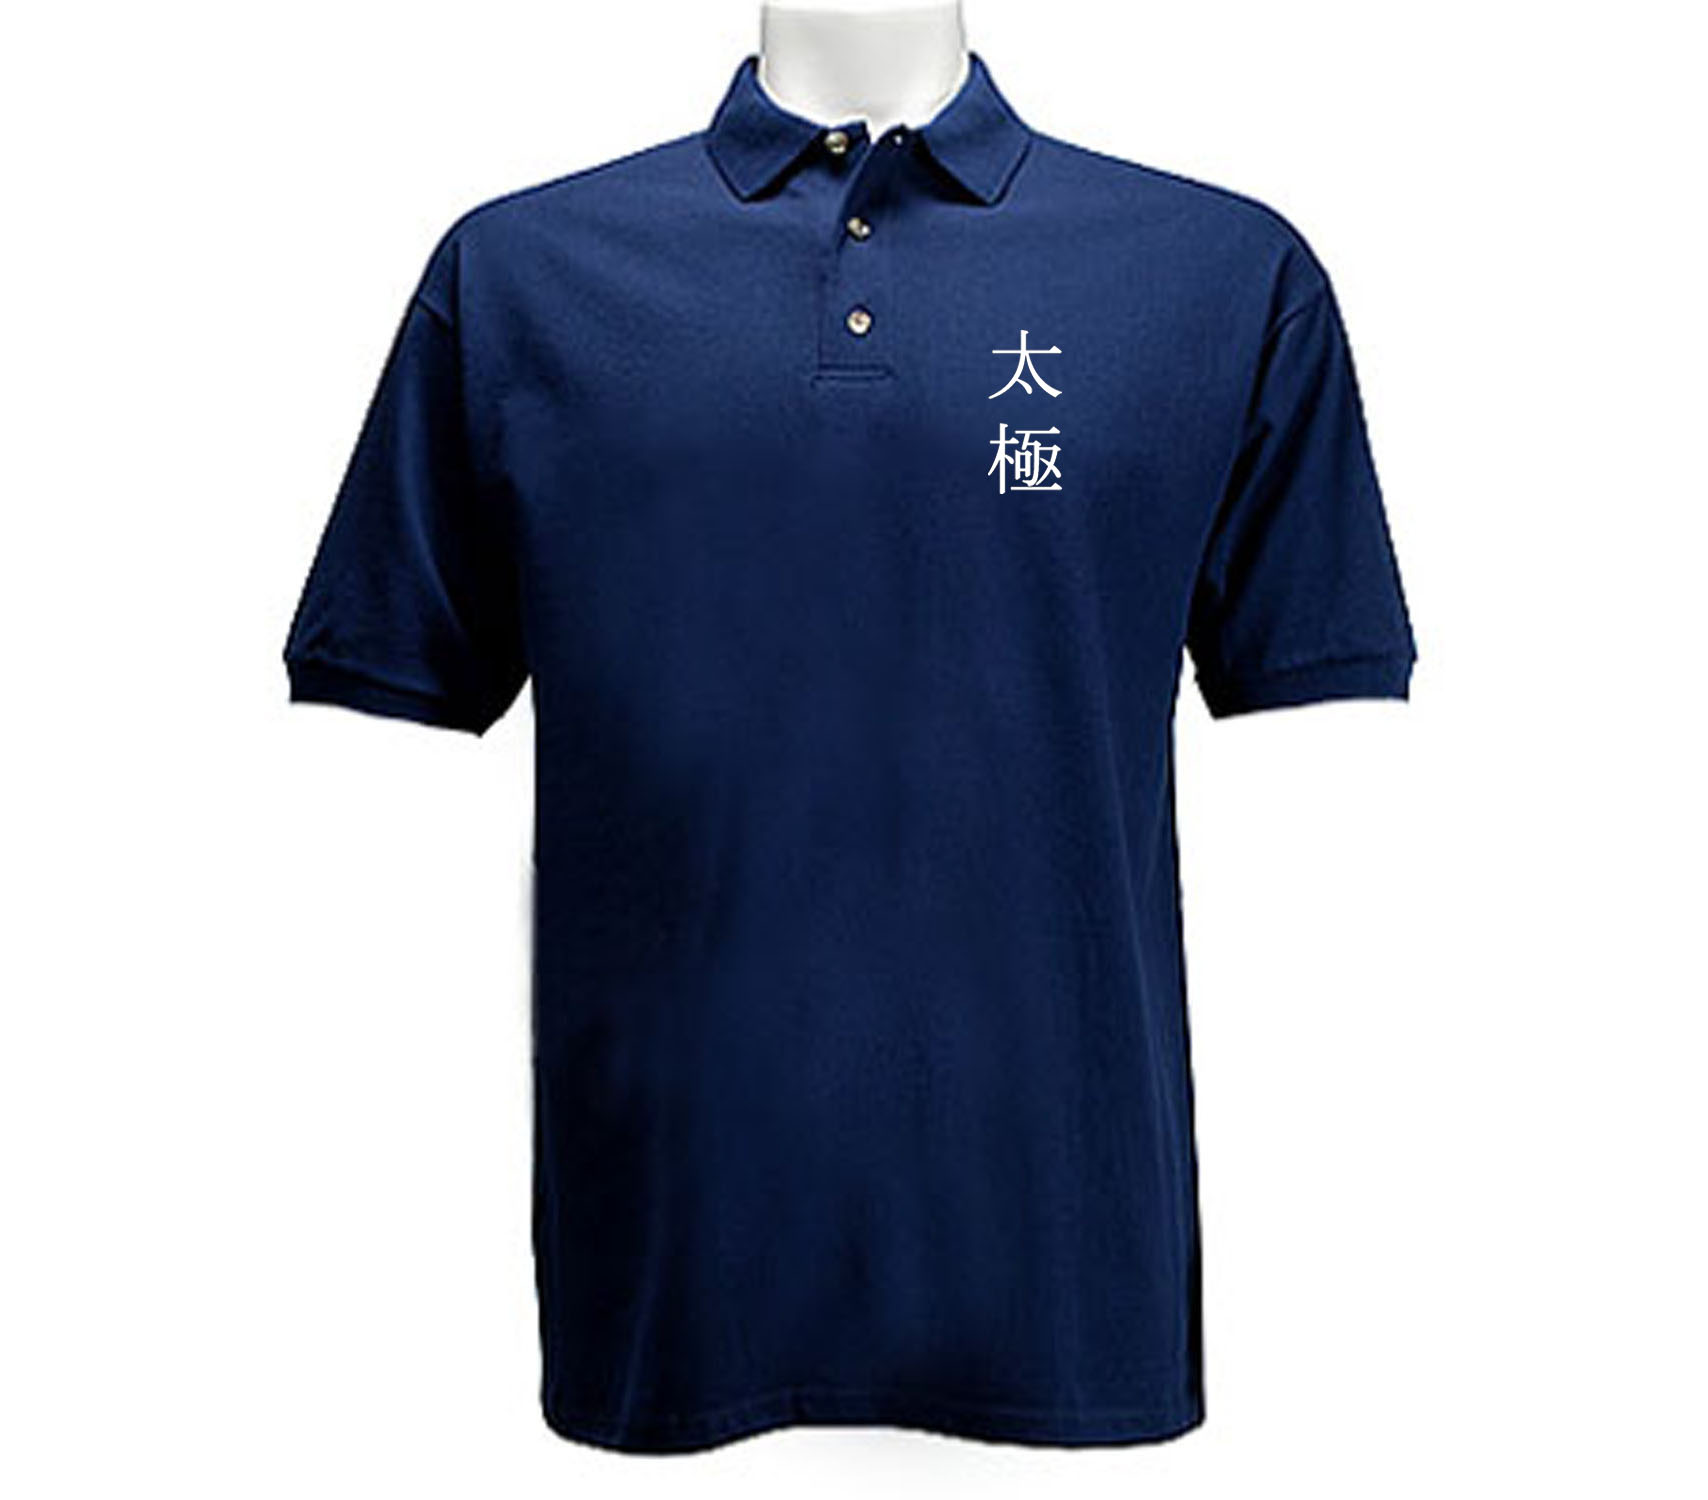 Tai Chi Martial arts polo style button up t-shirt